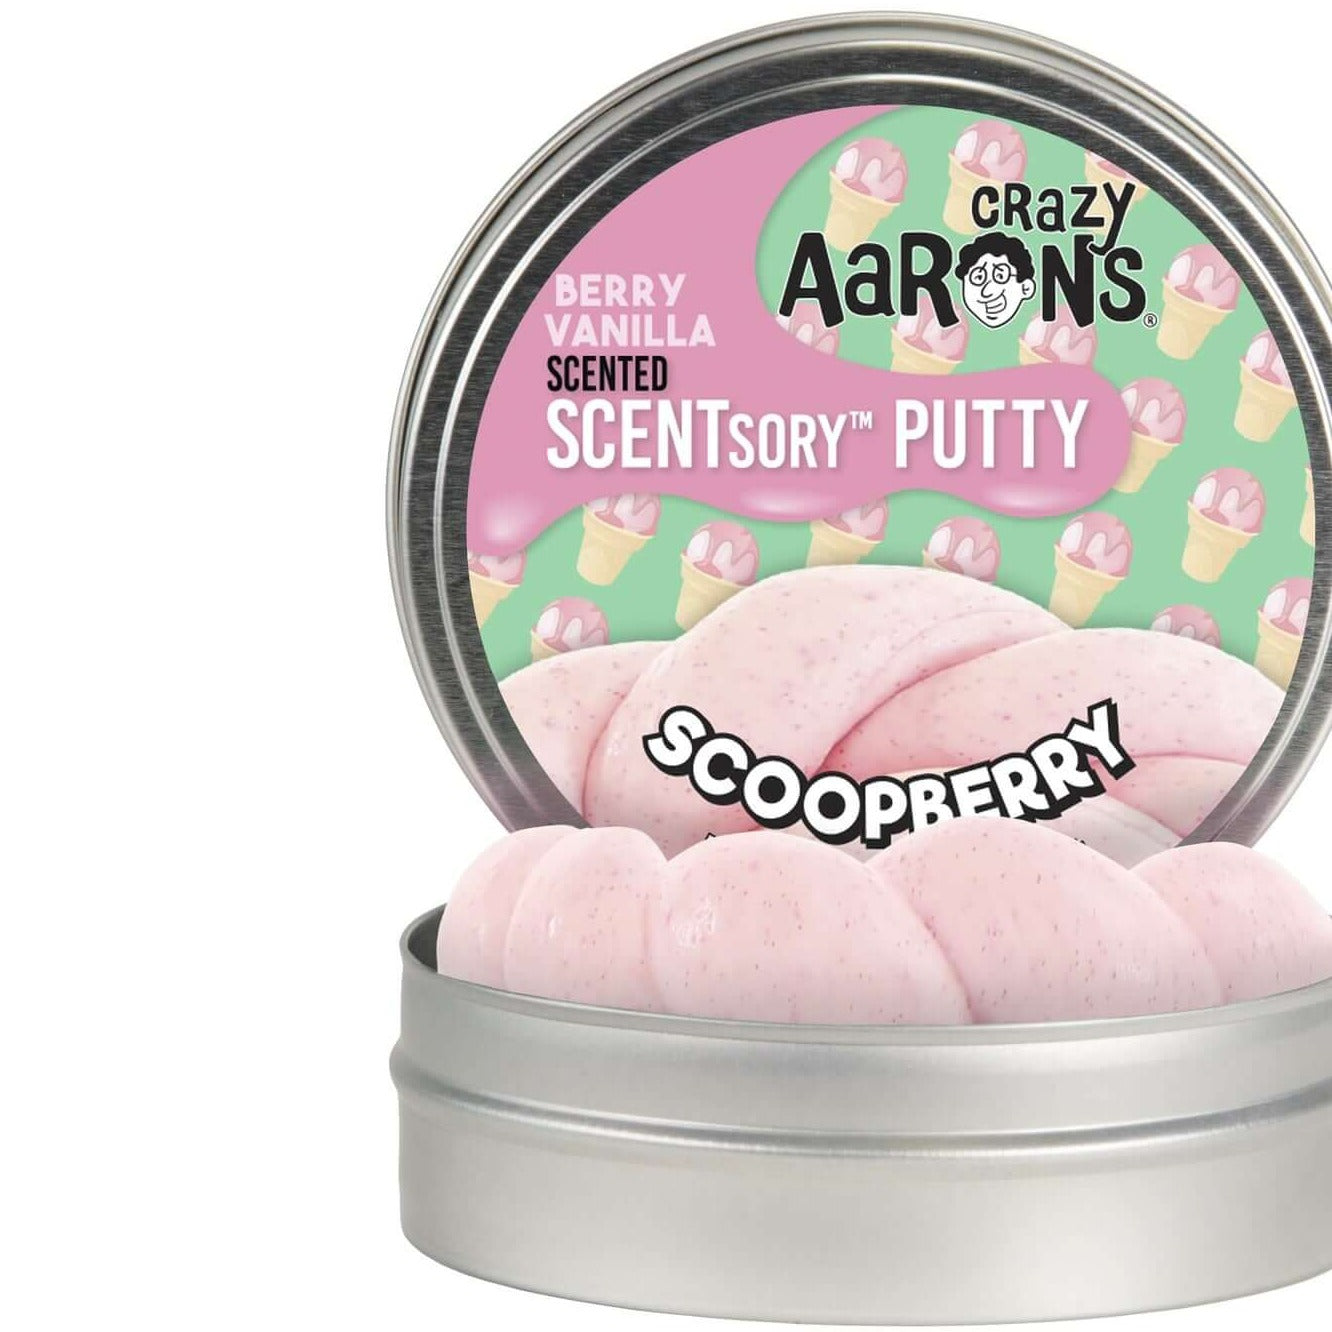 SB055 Crazy Aarons Putty scented scoopberry